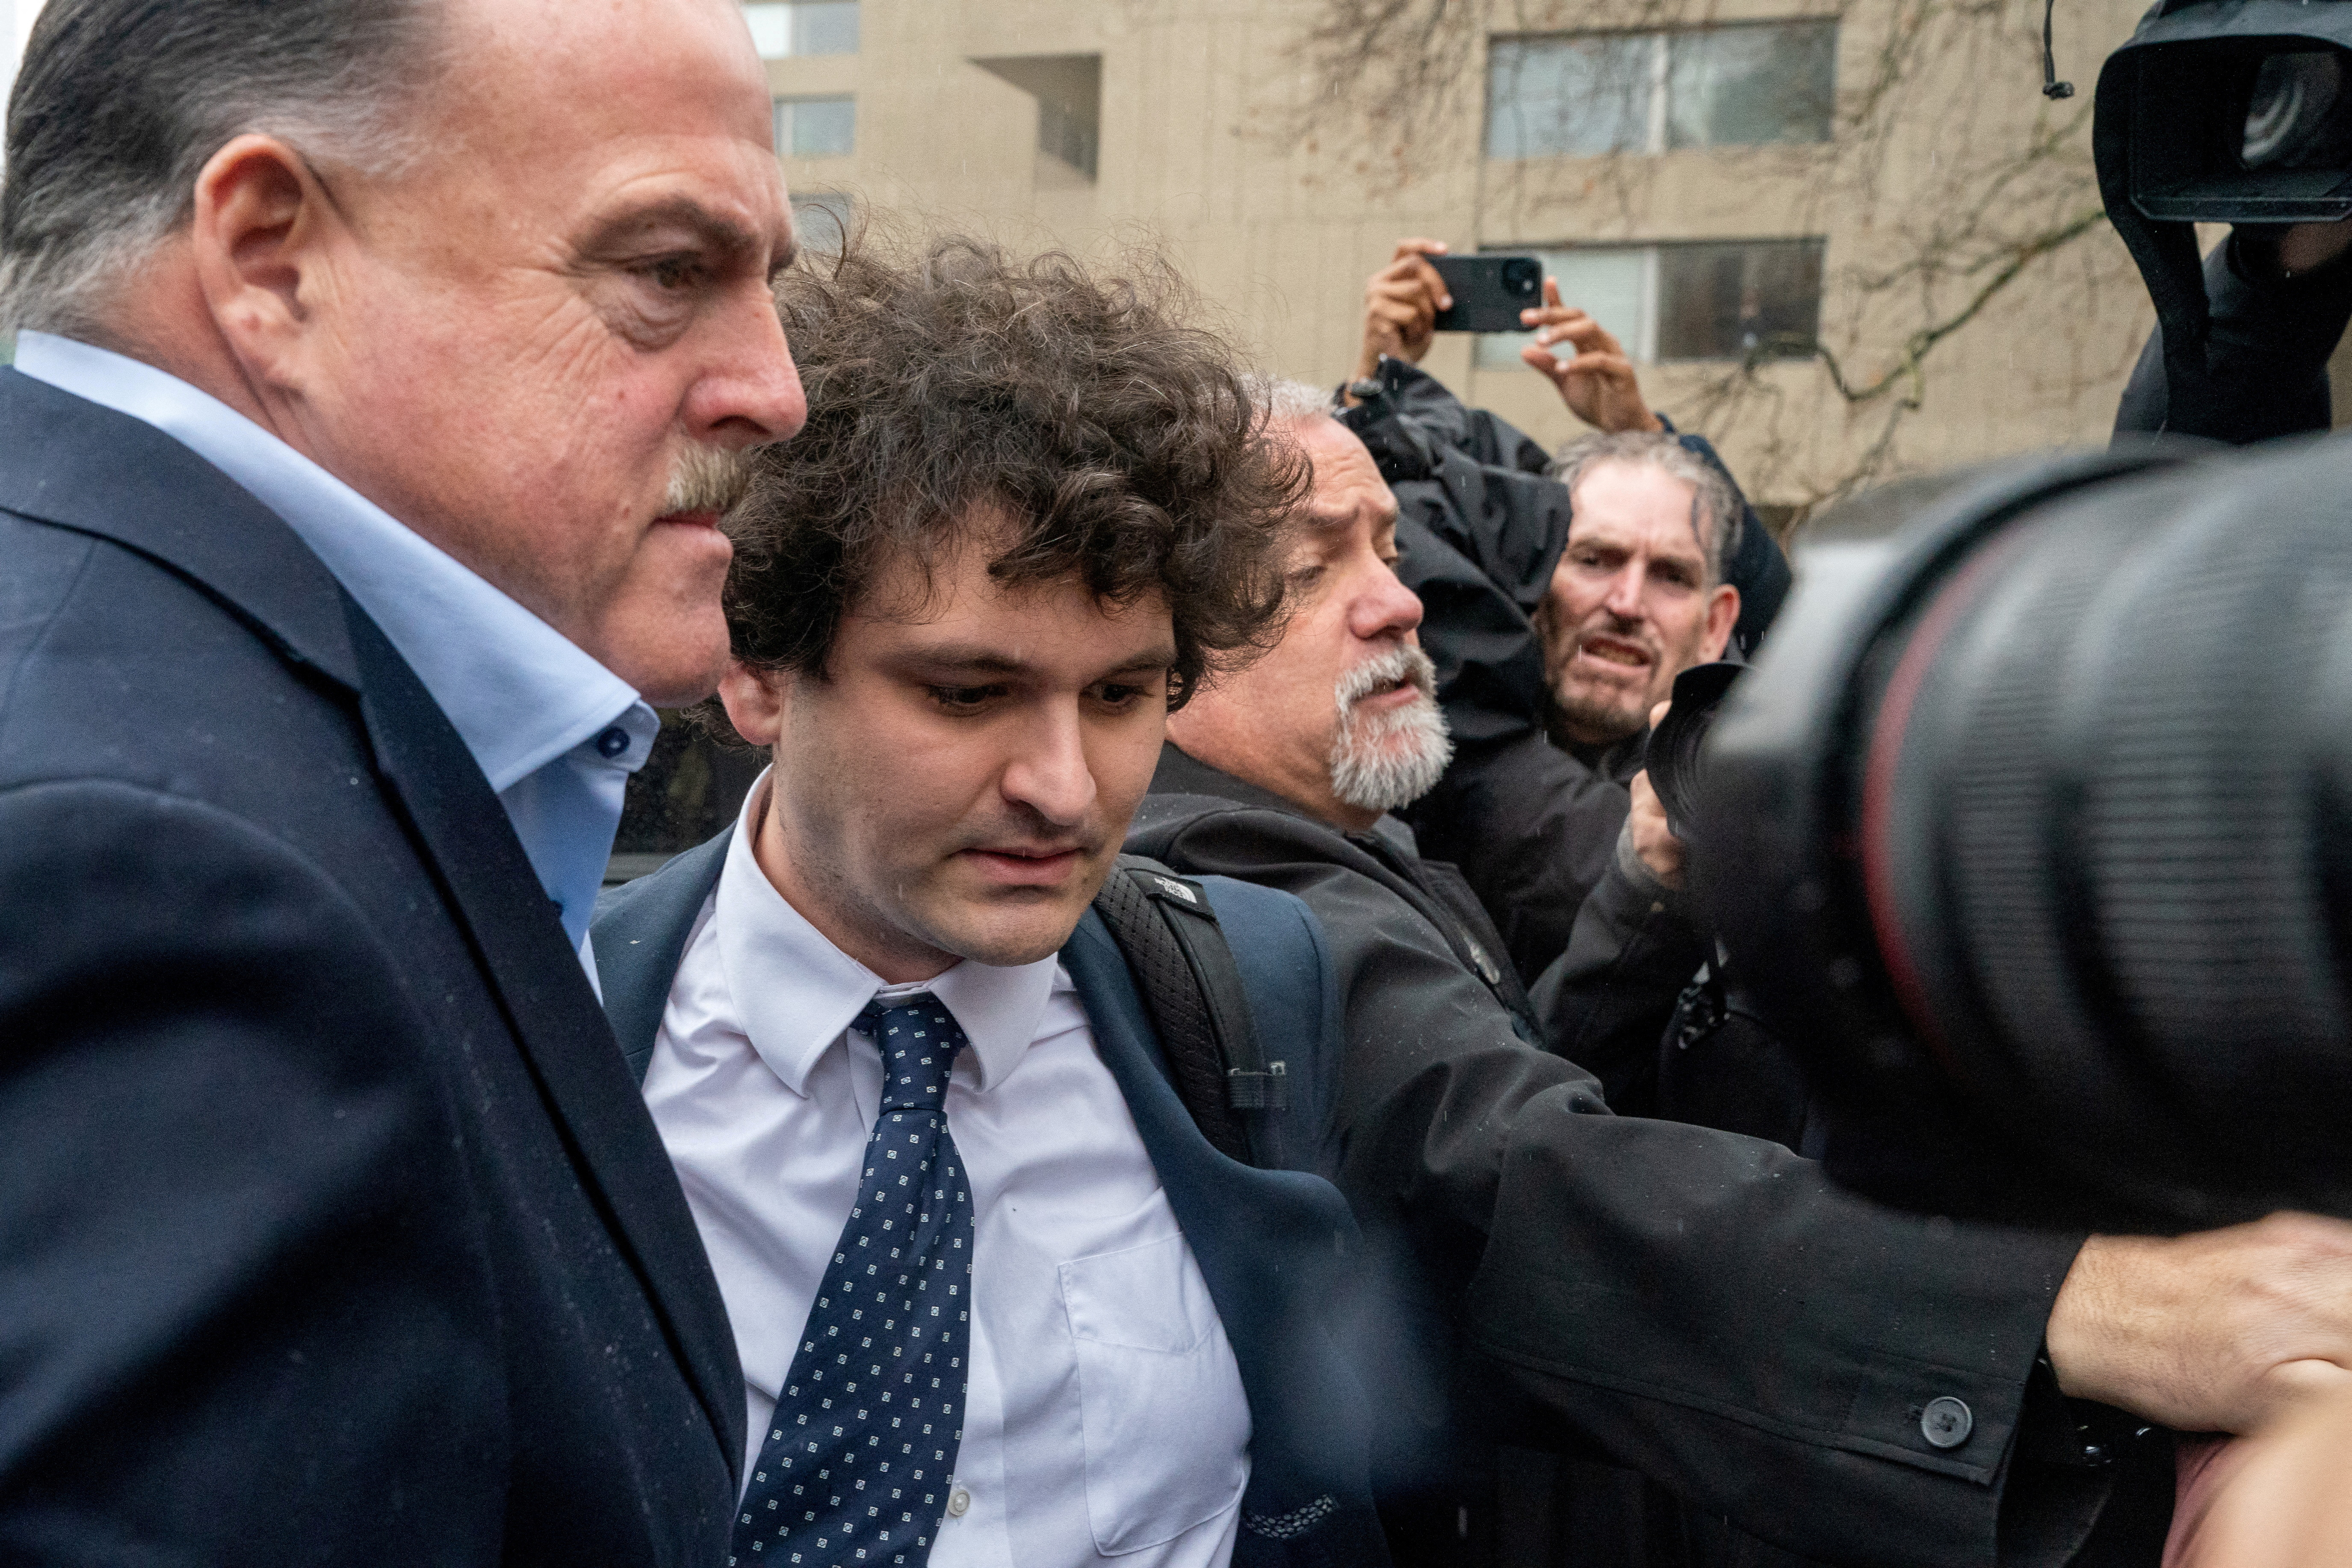 Sam Bankman Fried, leaving the federal courthouse in New York